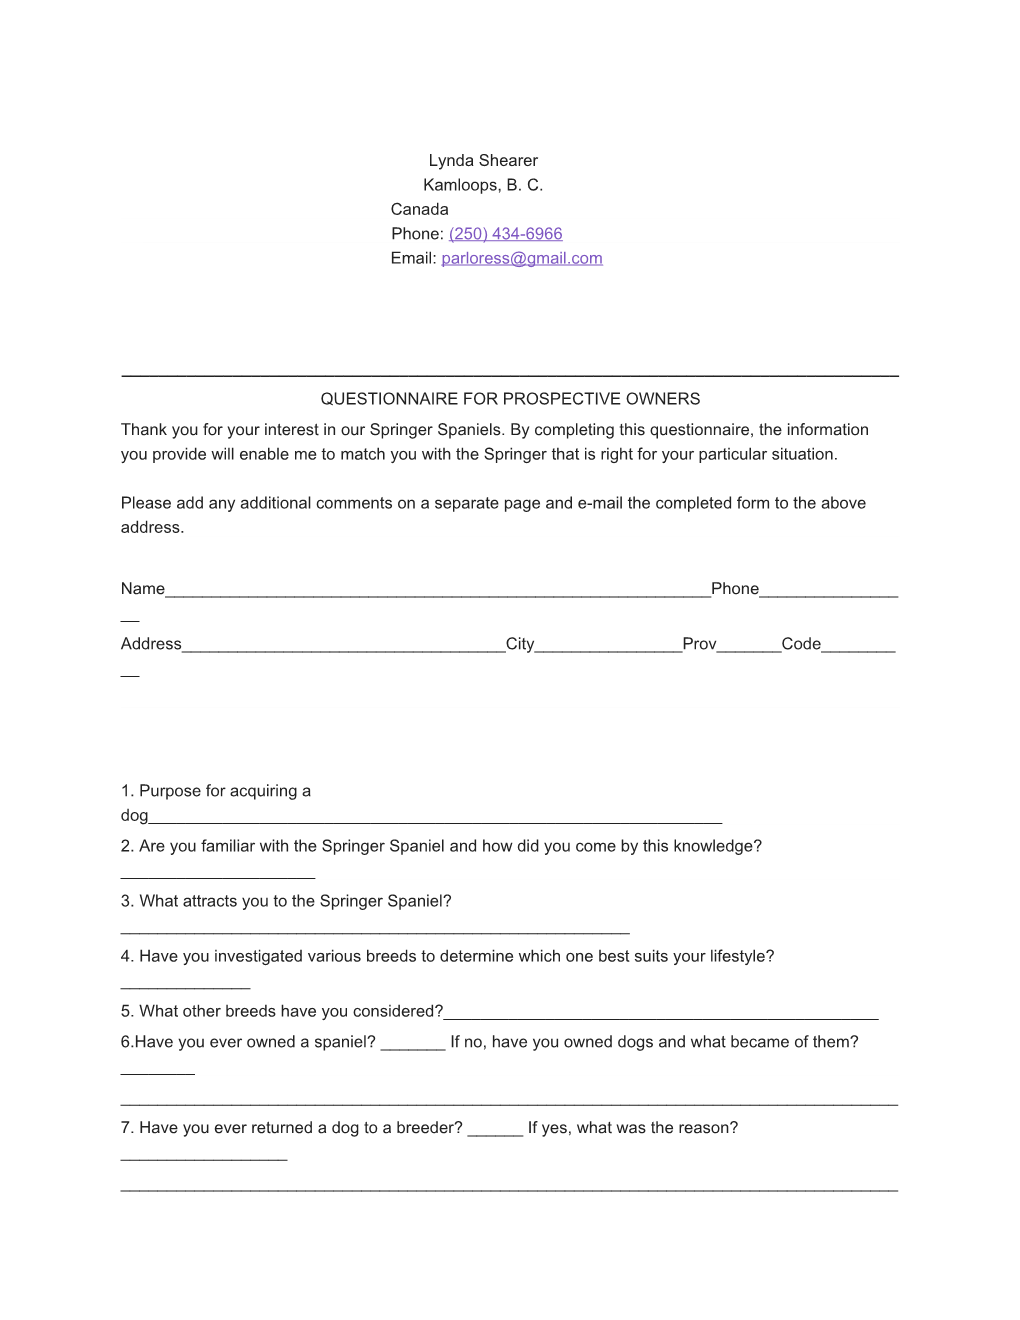 Questionnaire for Prospective Owners